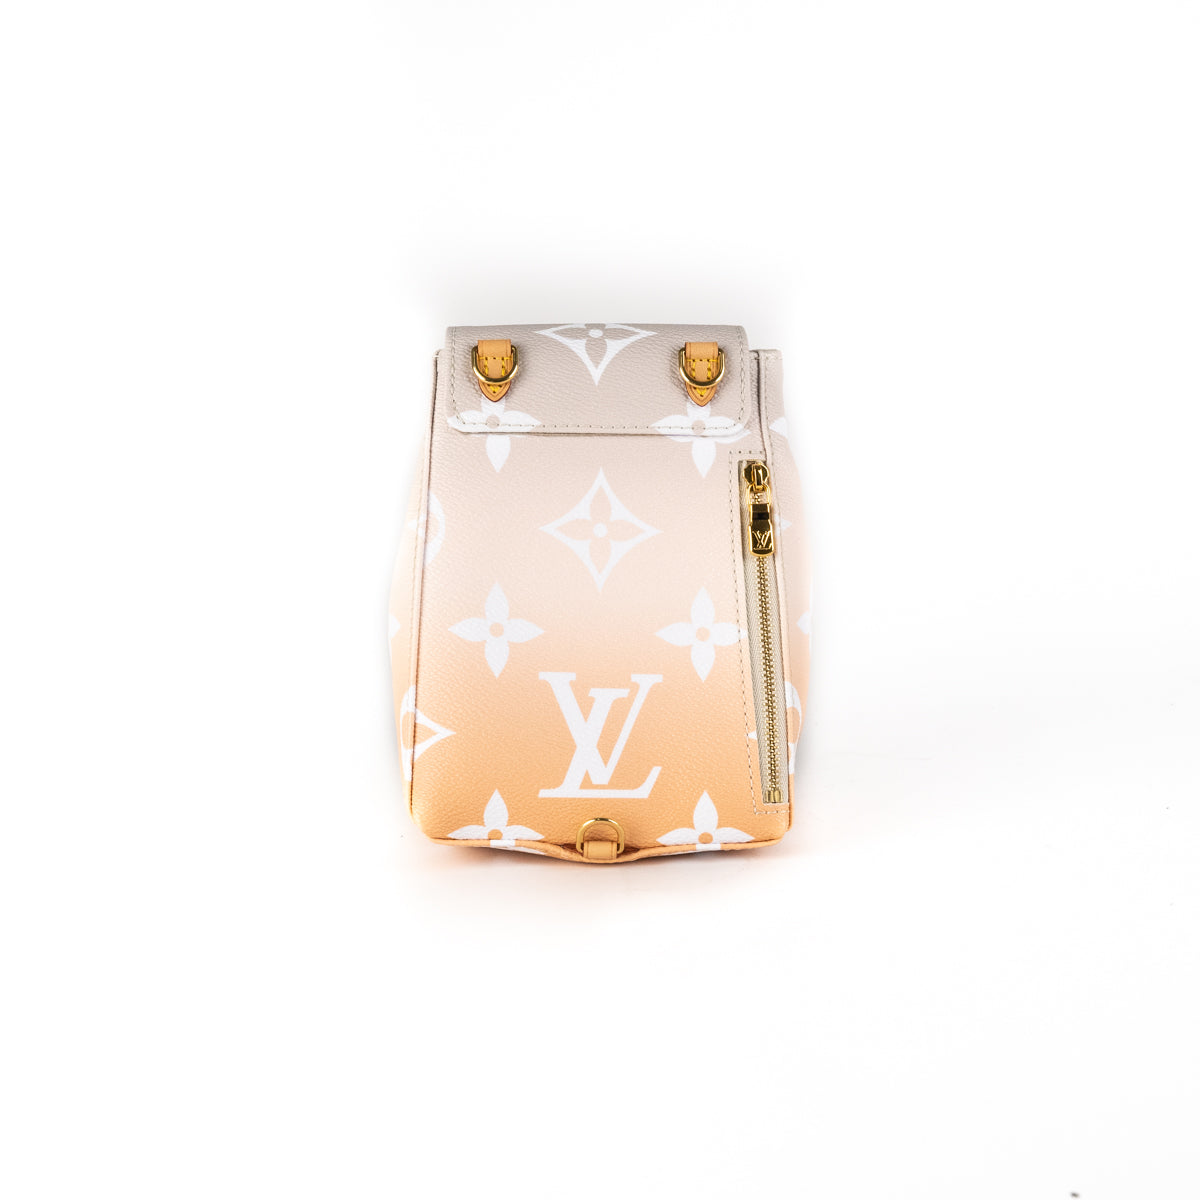 Louis Vuitton By the Pool Tiny Backpack - THE PURSE AFFAIR